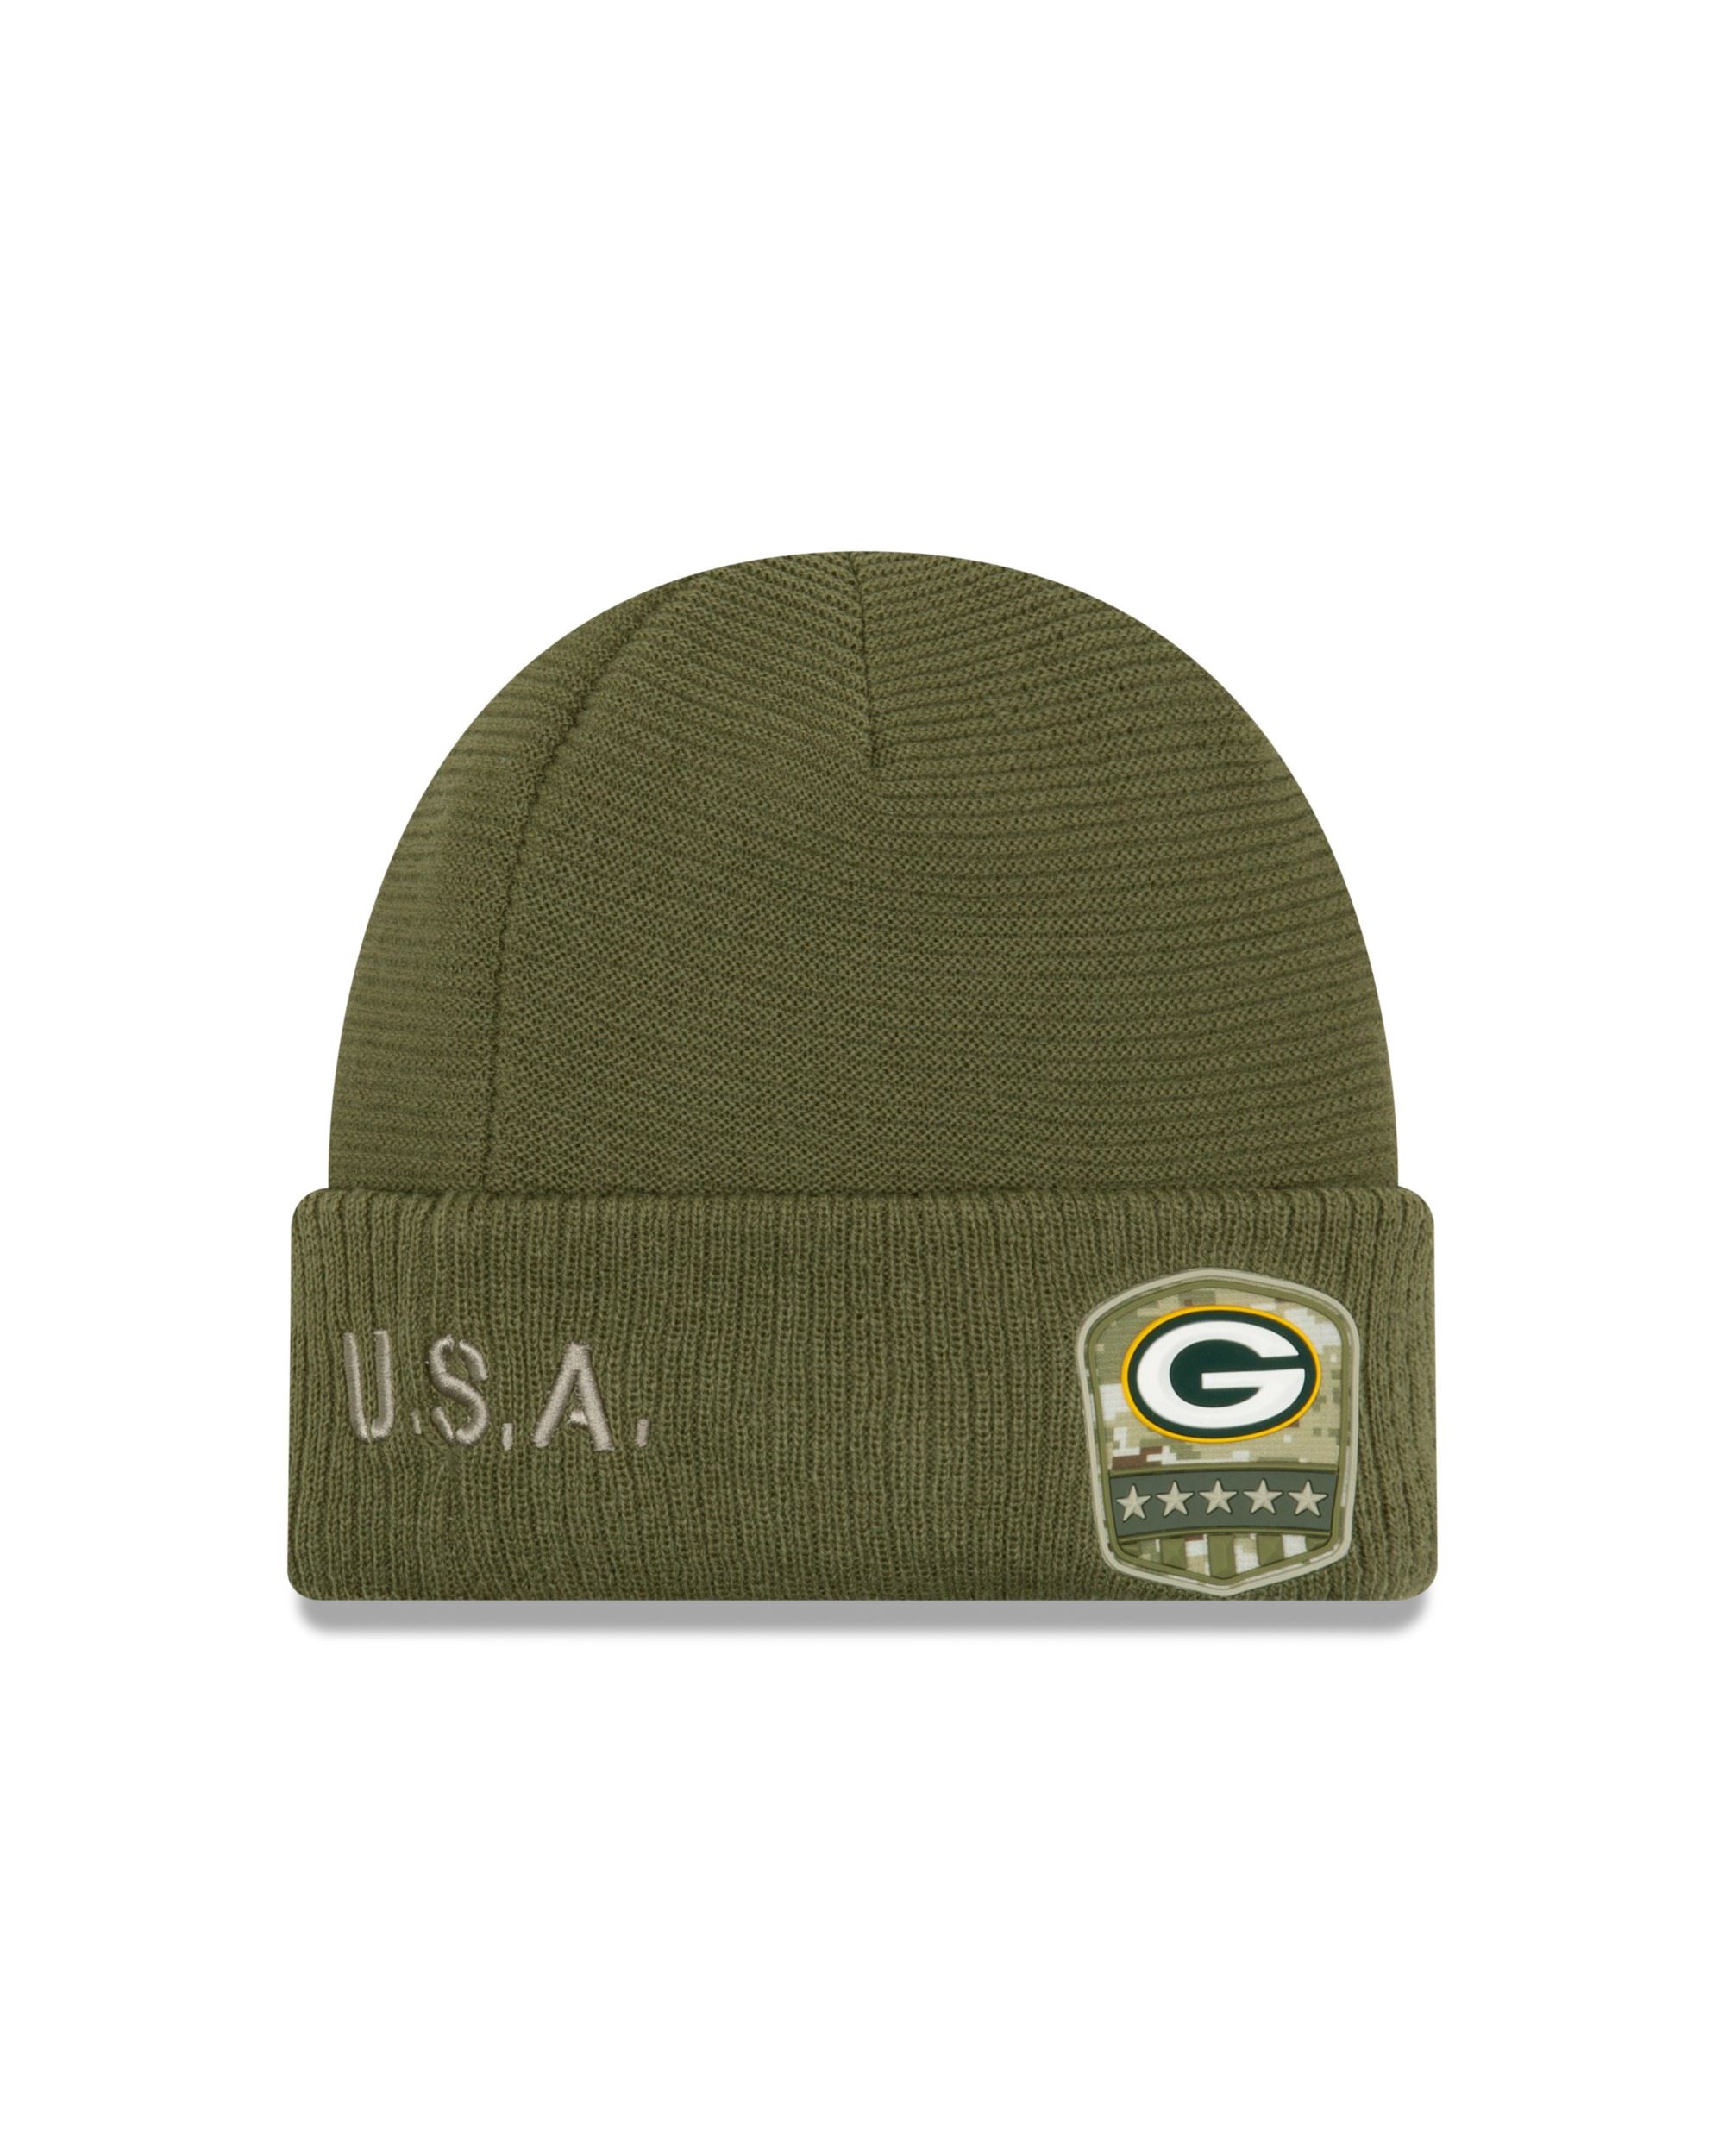 Green Bay Packers NFL On Field 2019 Salute to Service Beanie New Era